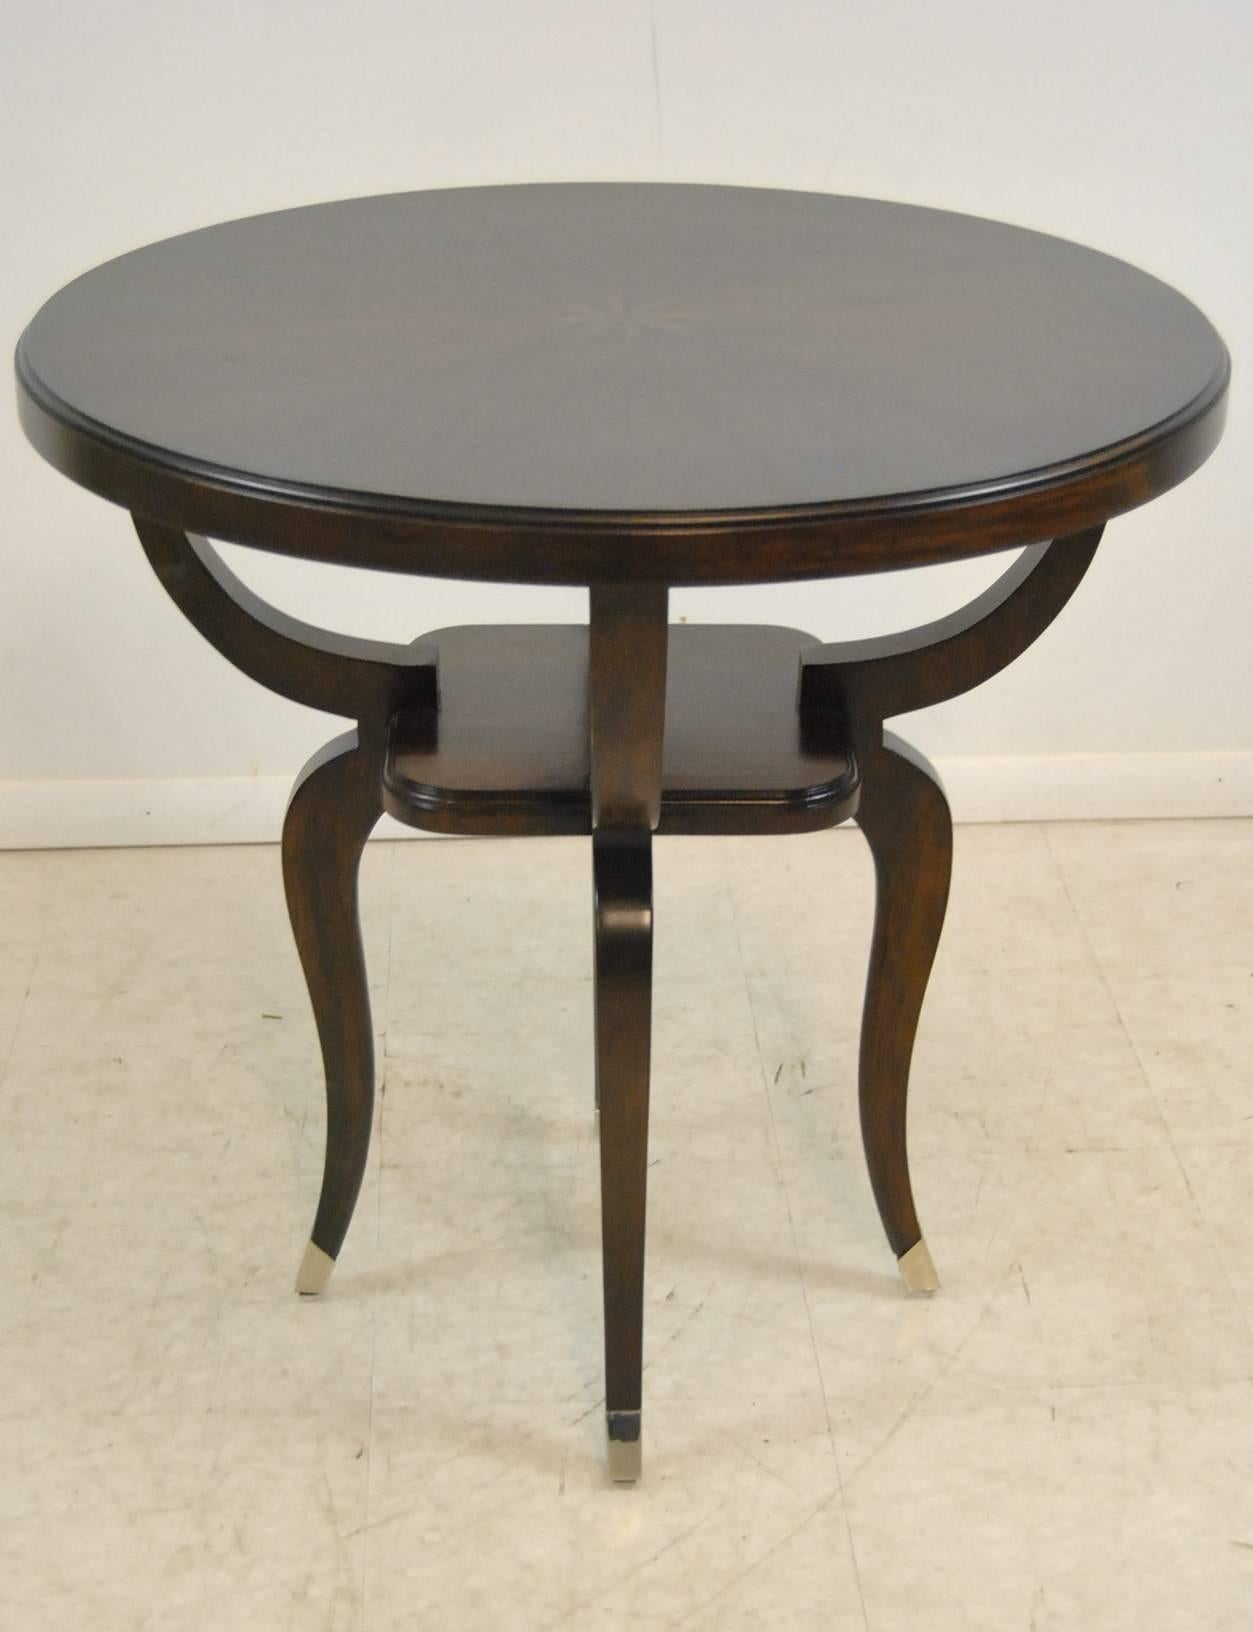 An unusual round end table by Robb & Stucky. This is the Parisian end table which is 29